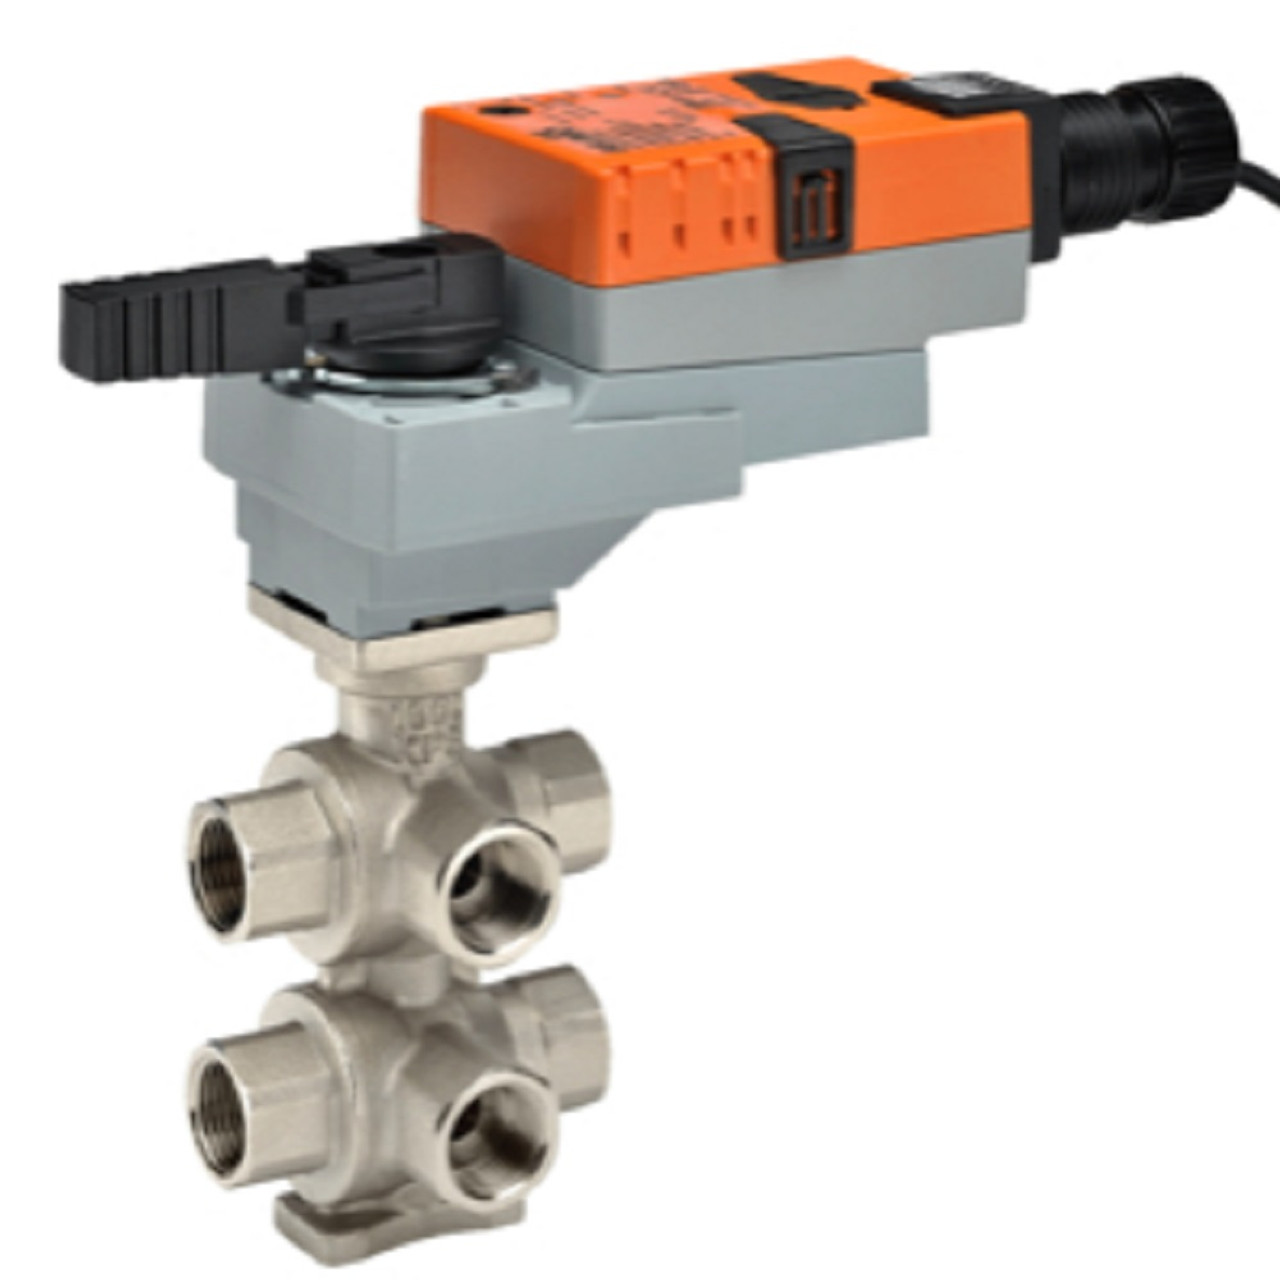 Belimo B320-490-470+LRB24-SR Characterized Control Valve (6-way CCV), 3/4, 6-way [New]